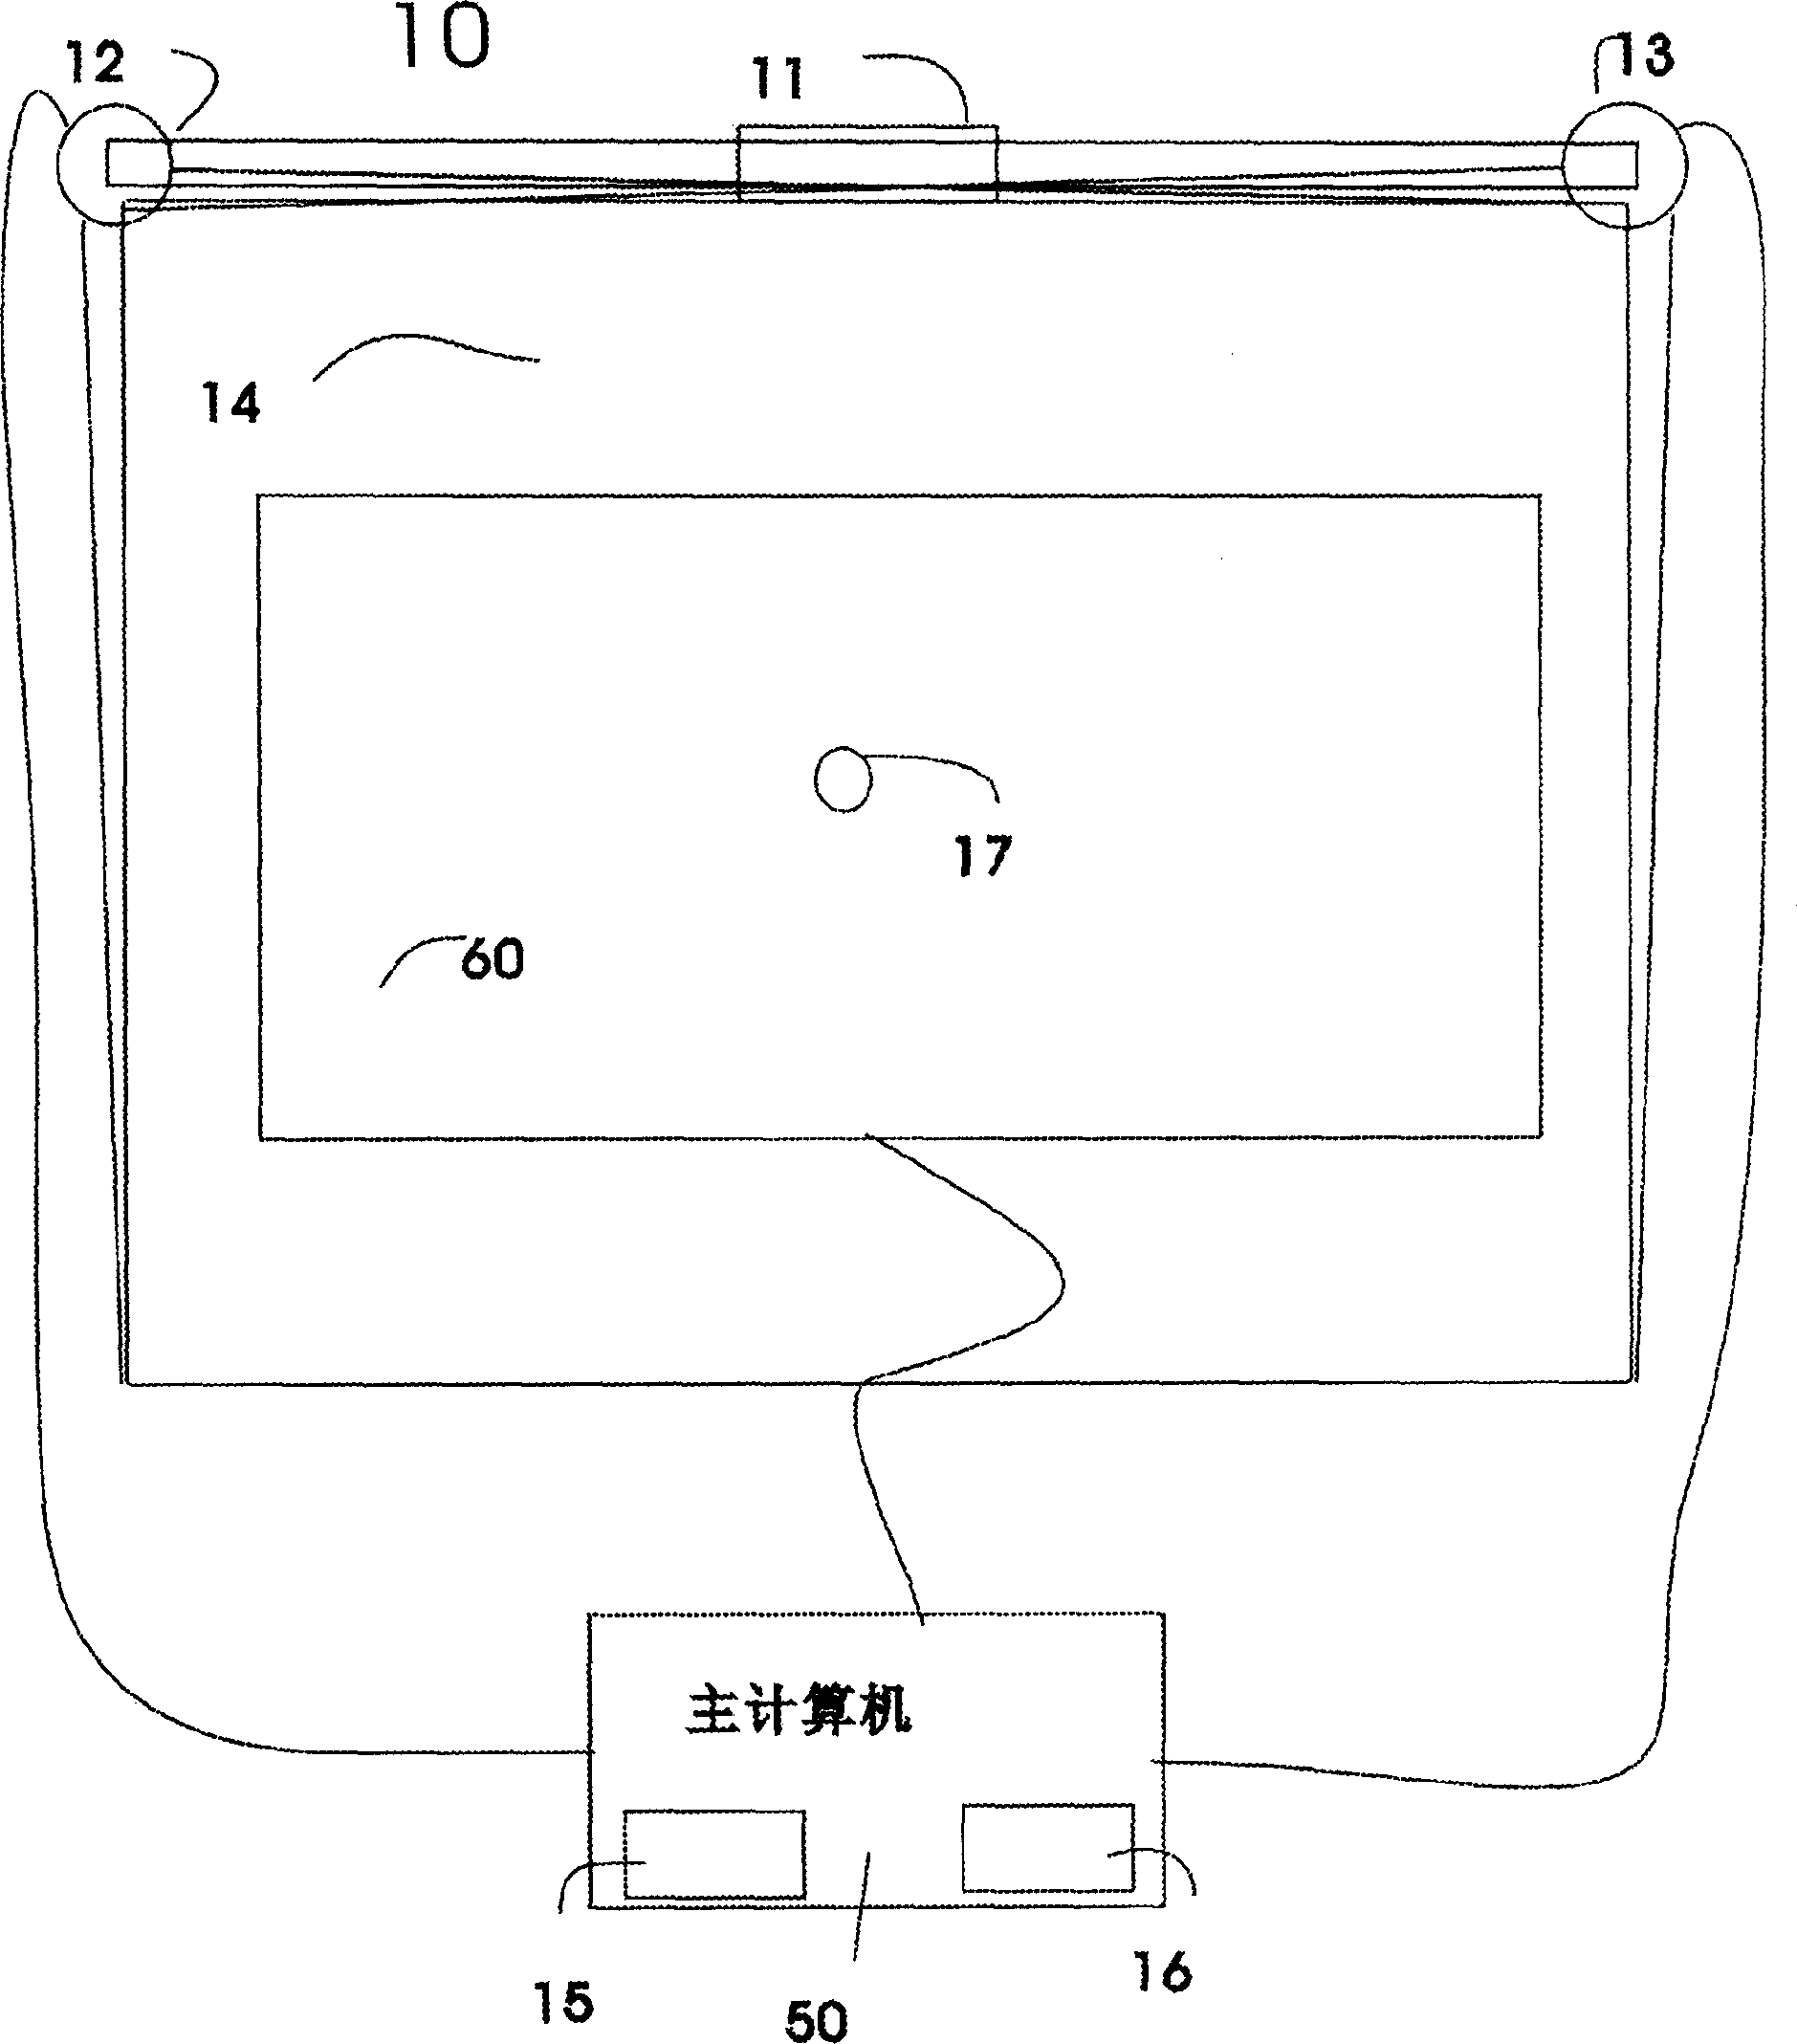 Size variable touch system based on pattern recognition